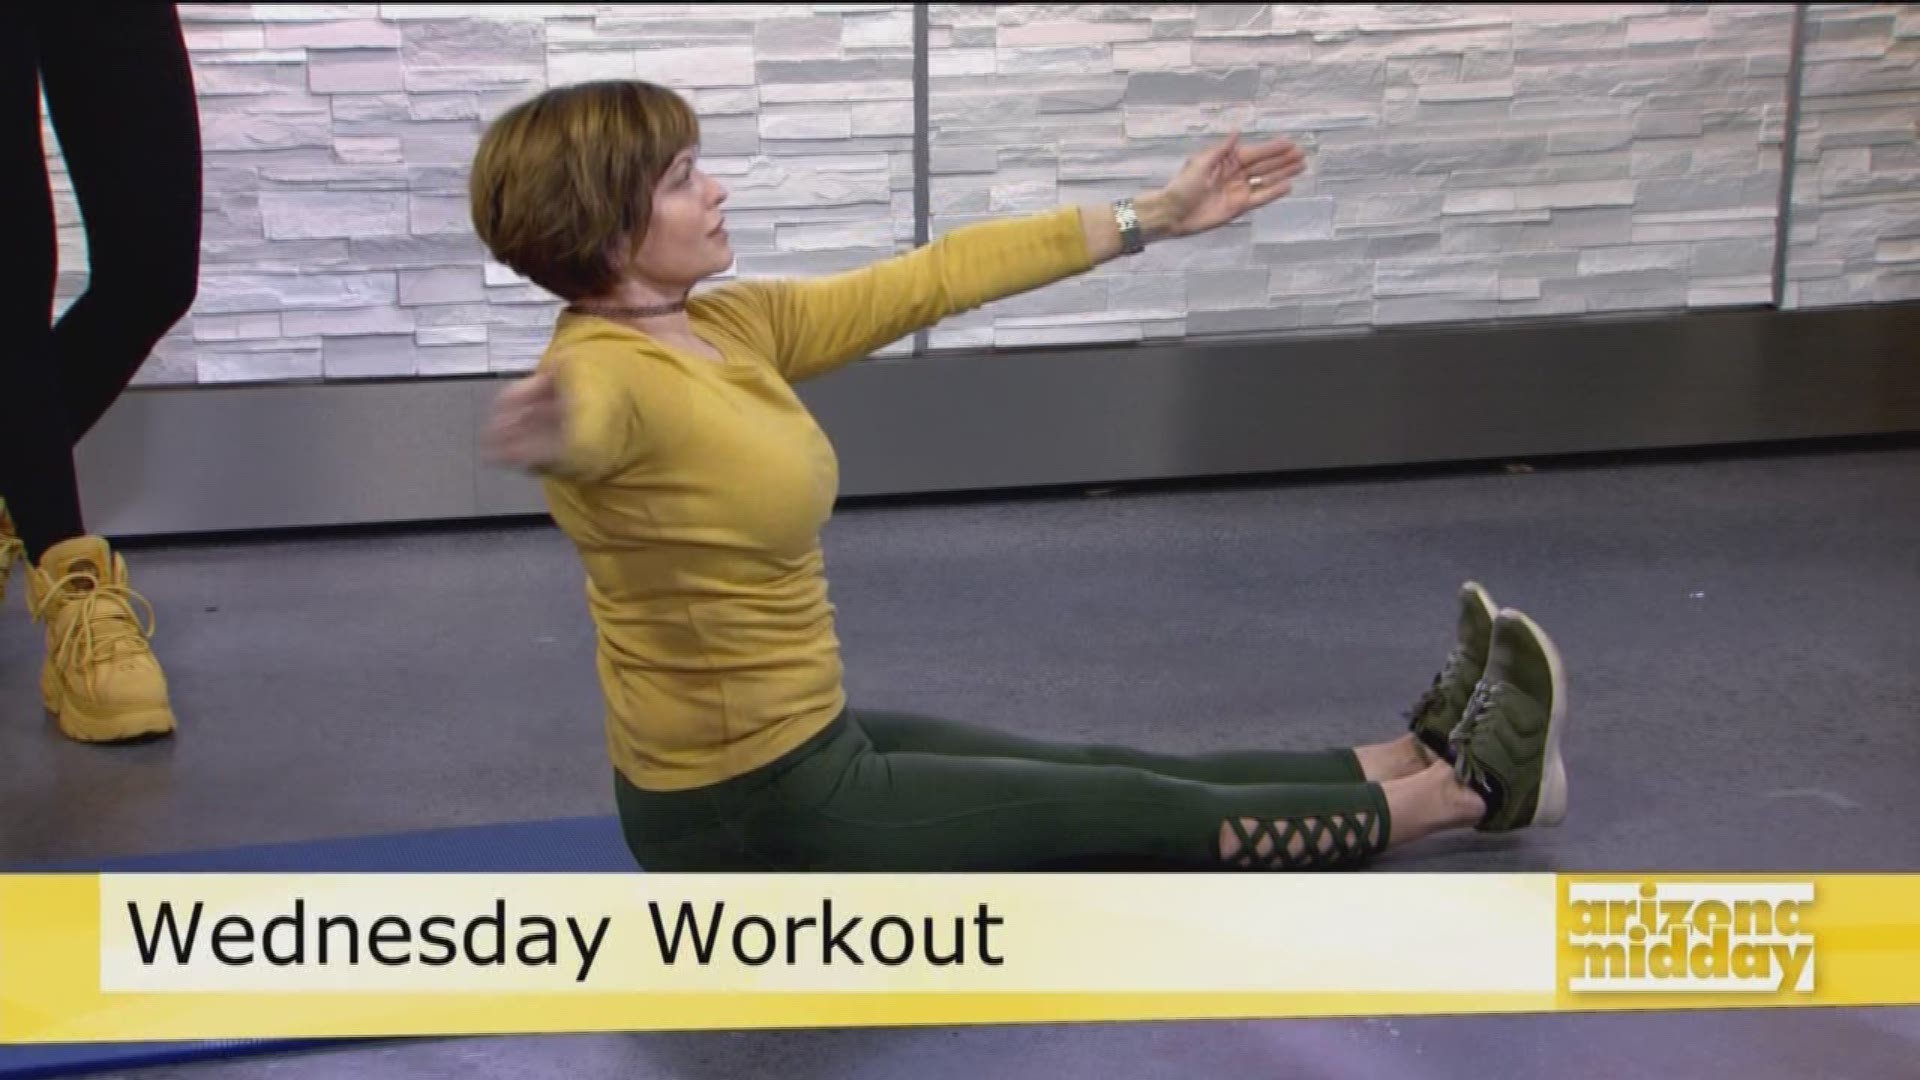 Personal Trainer Angela Jordan shows us five moves that will help you get lean and strong for those holiday pictures.